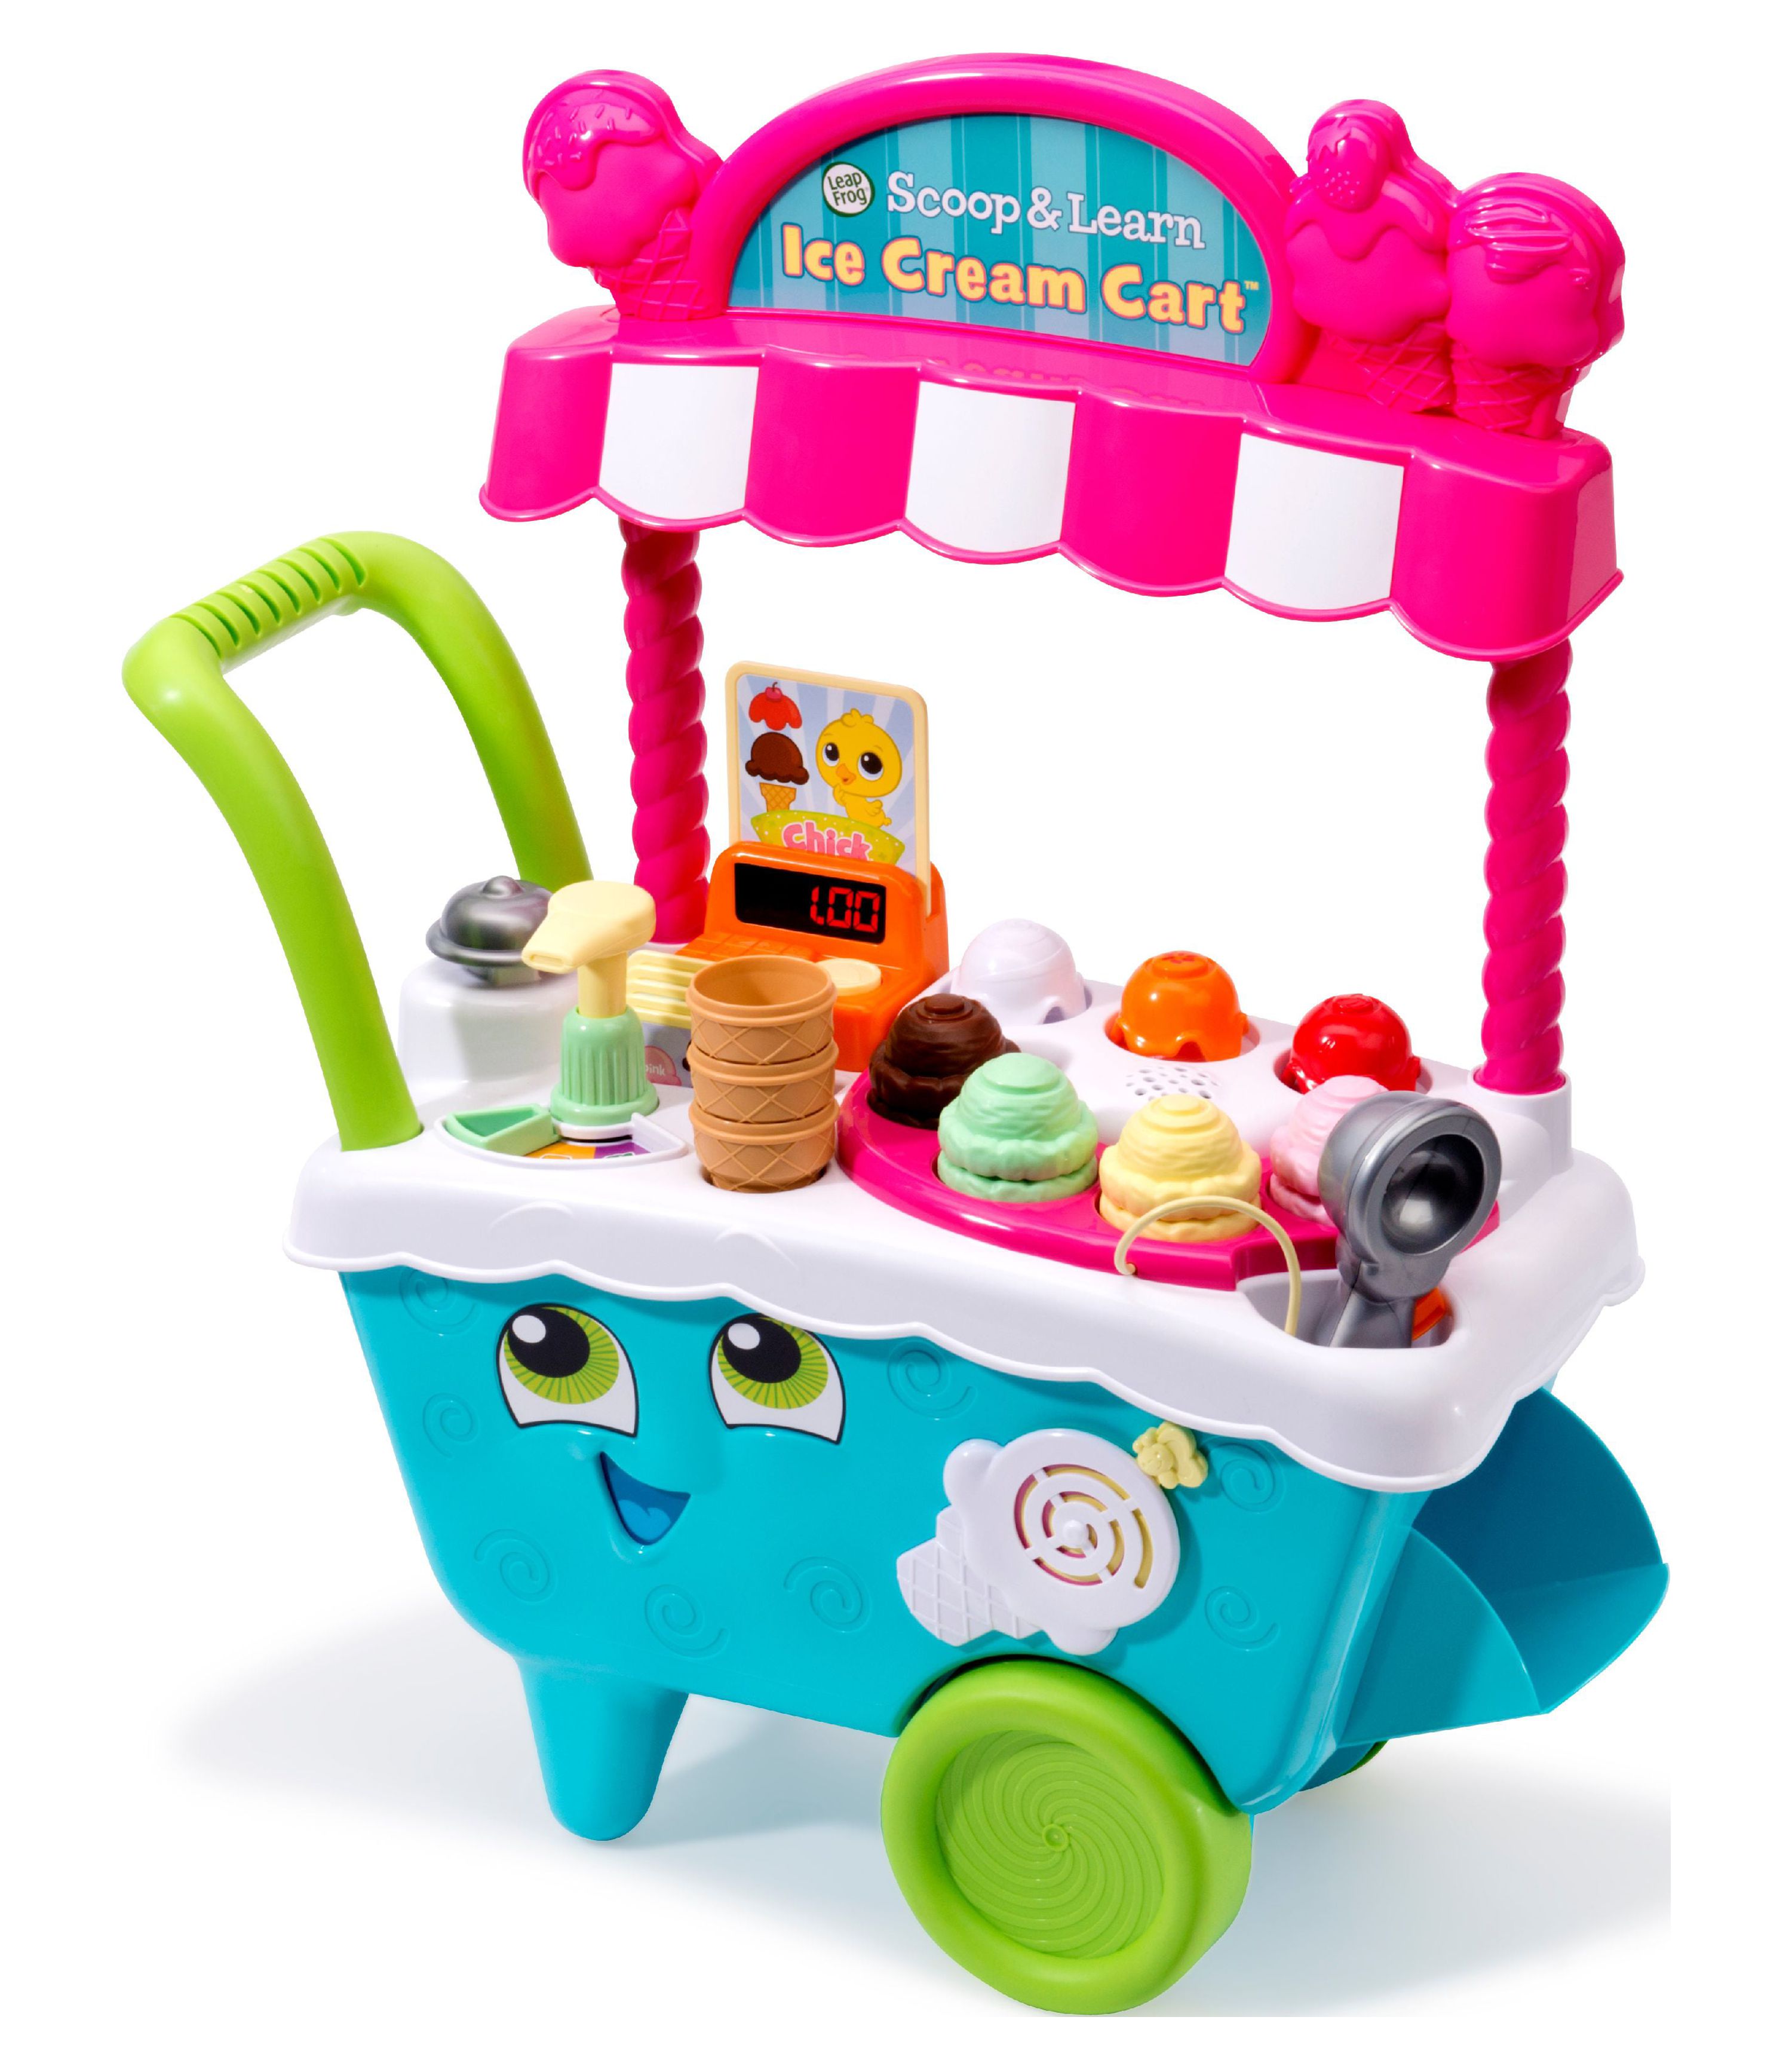 LeapFrog Scoop and Learn Ice Cream Cart, Multi-Color Play Kitchen Toy for Kids - image 3 of 20